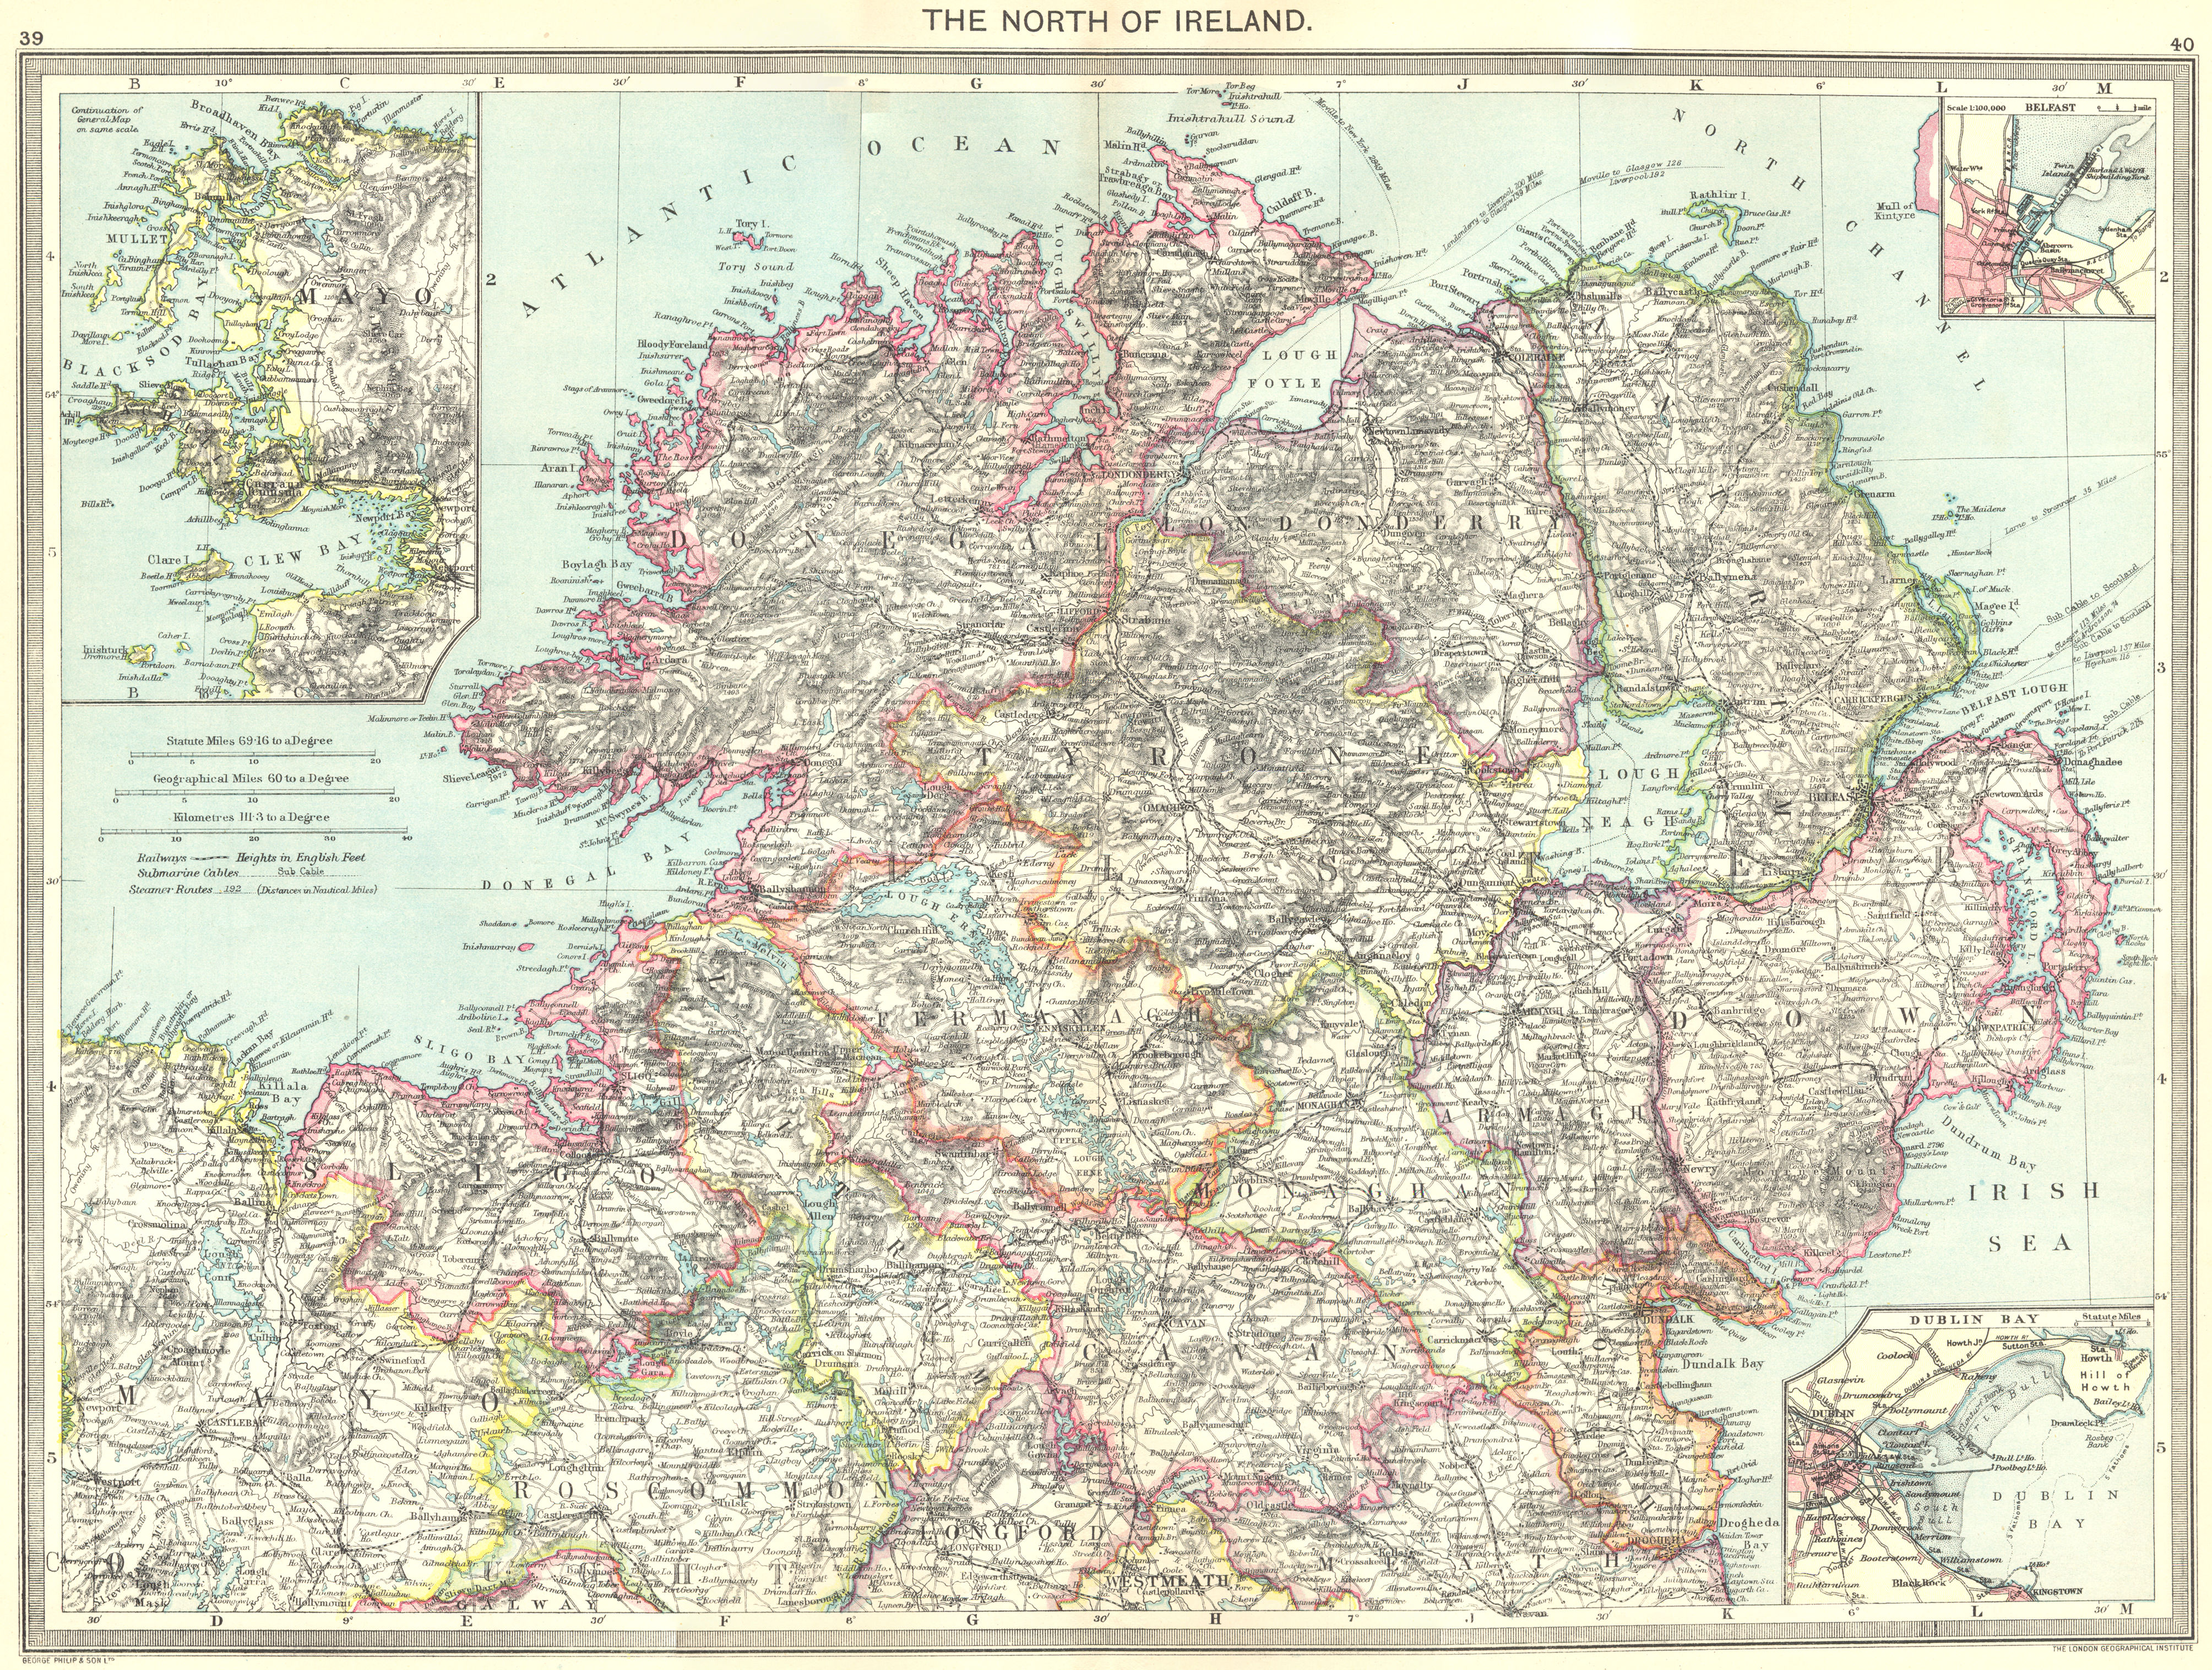 Associate Product IRELAND. North of; maps Belfast; Mayo; Dublin Bay 1907 old antique chart